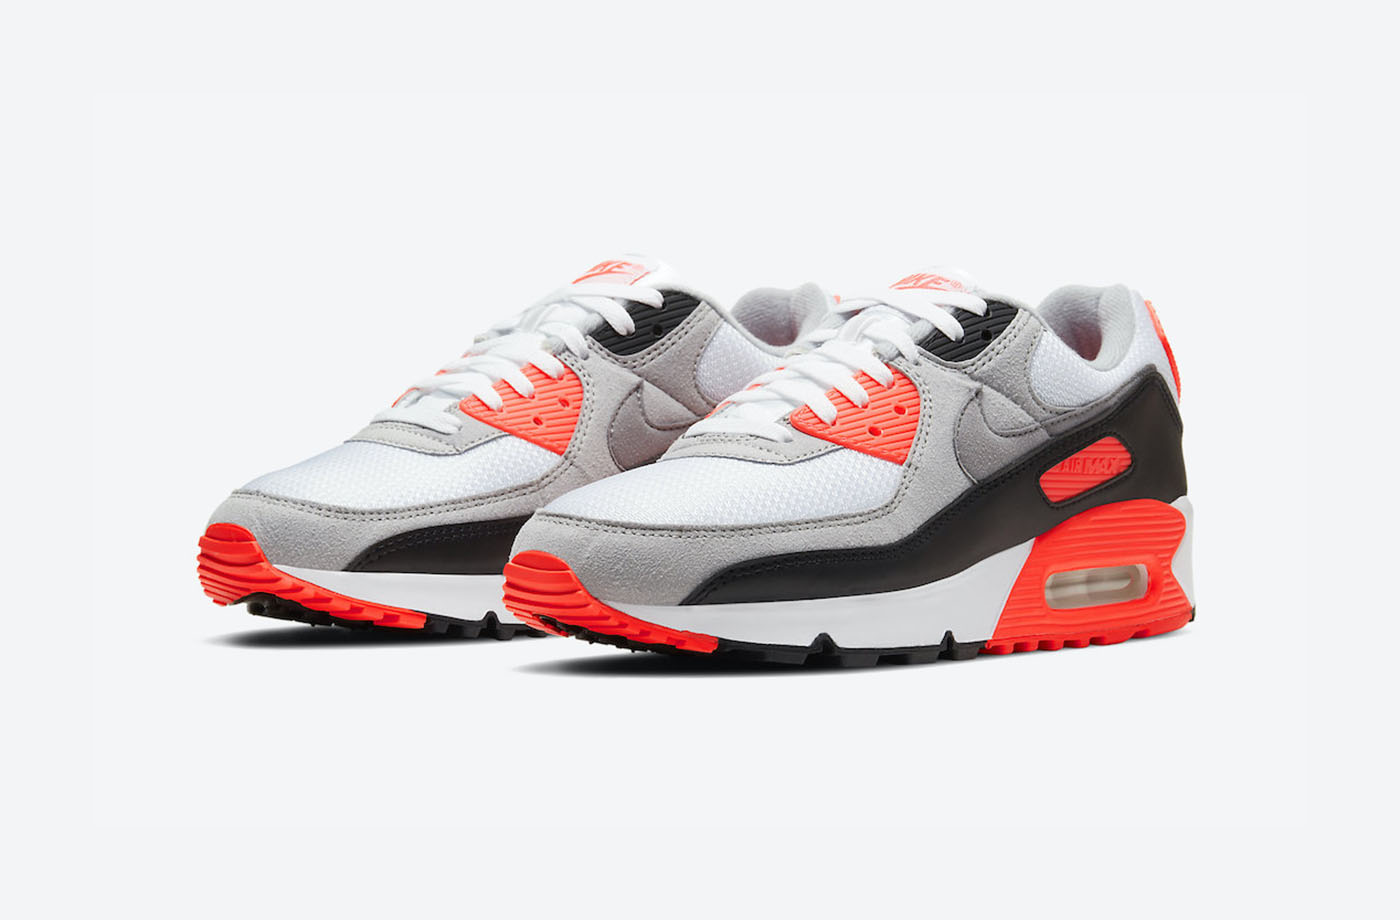 Nike Air Max 90 Price Increase from $120 to $130 | SoleSavy